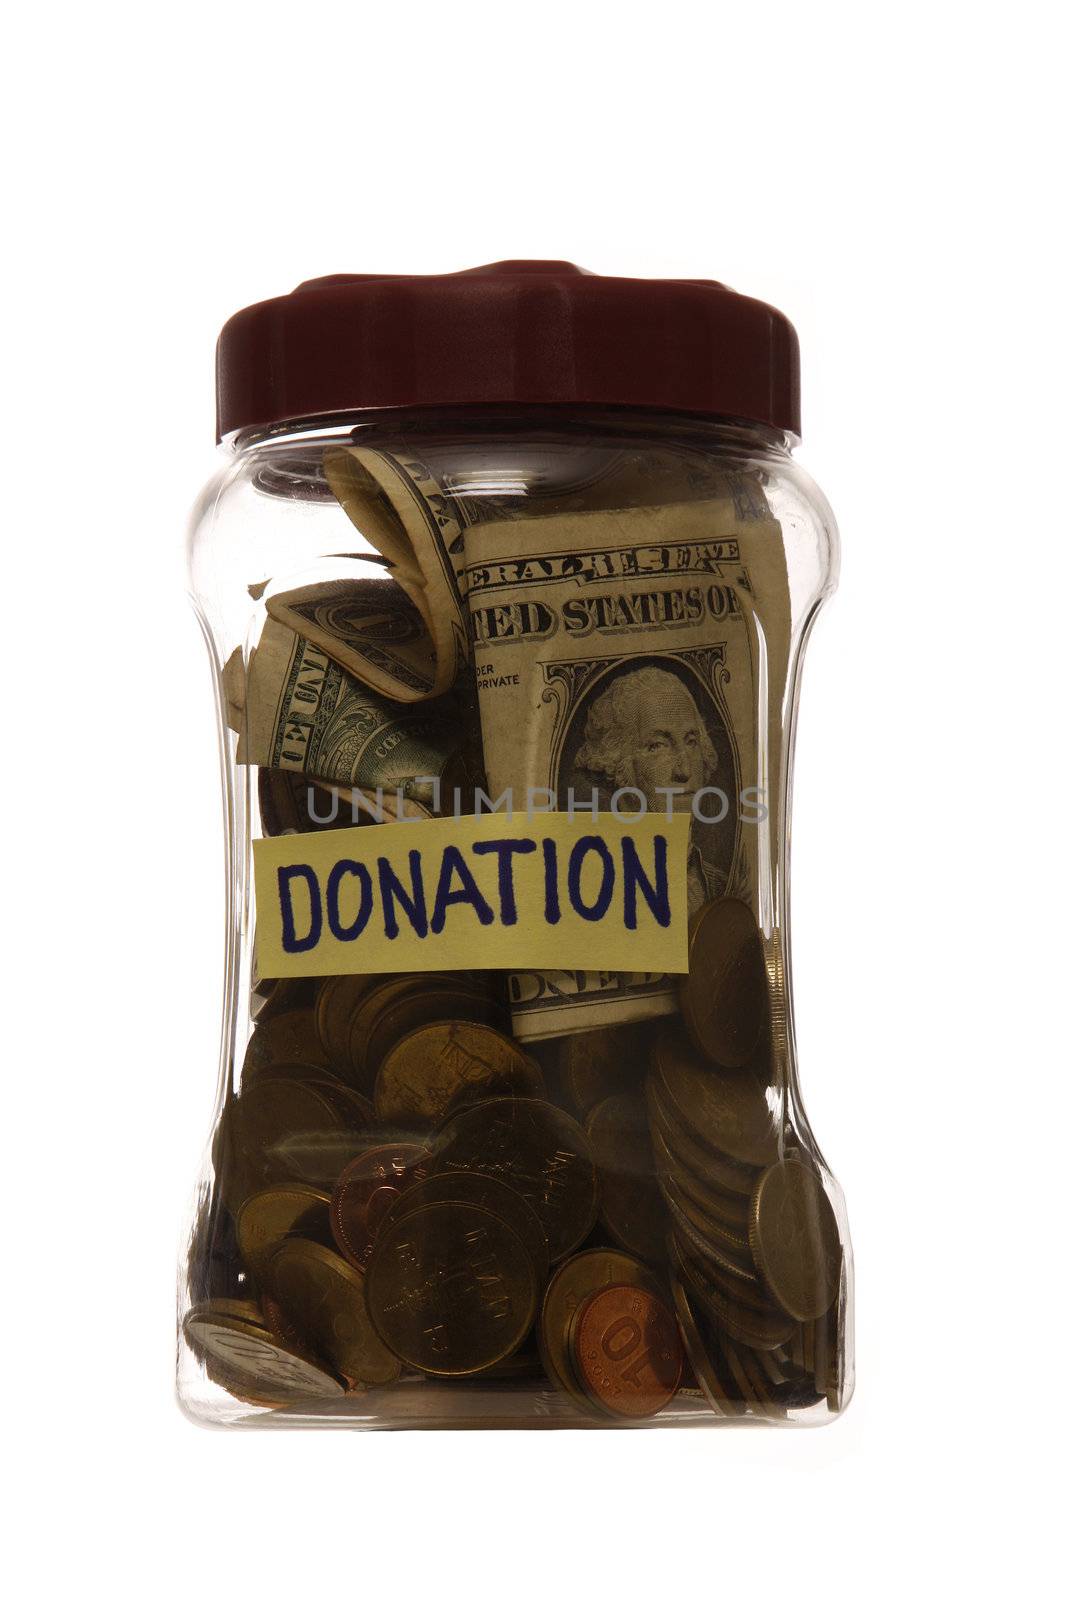 Donation in a jar by sacatani